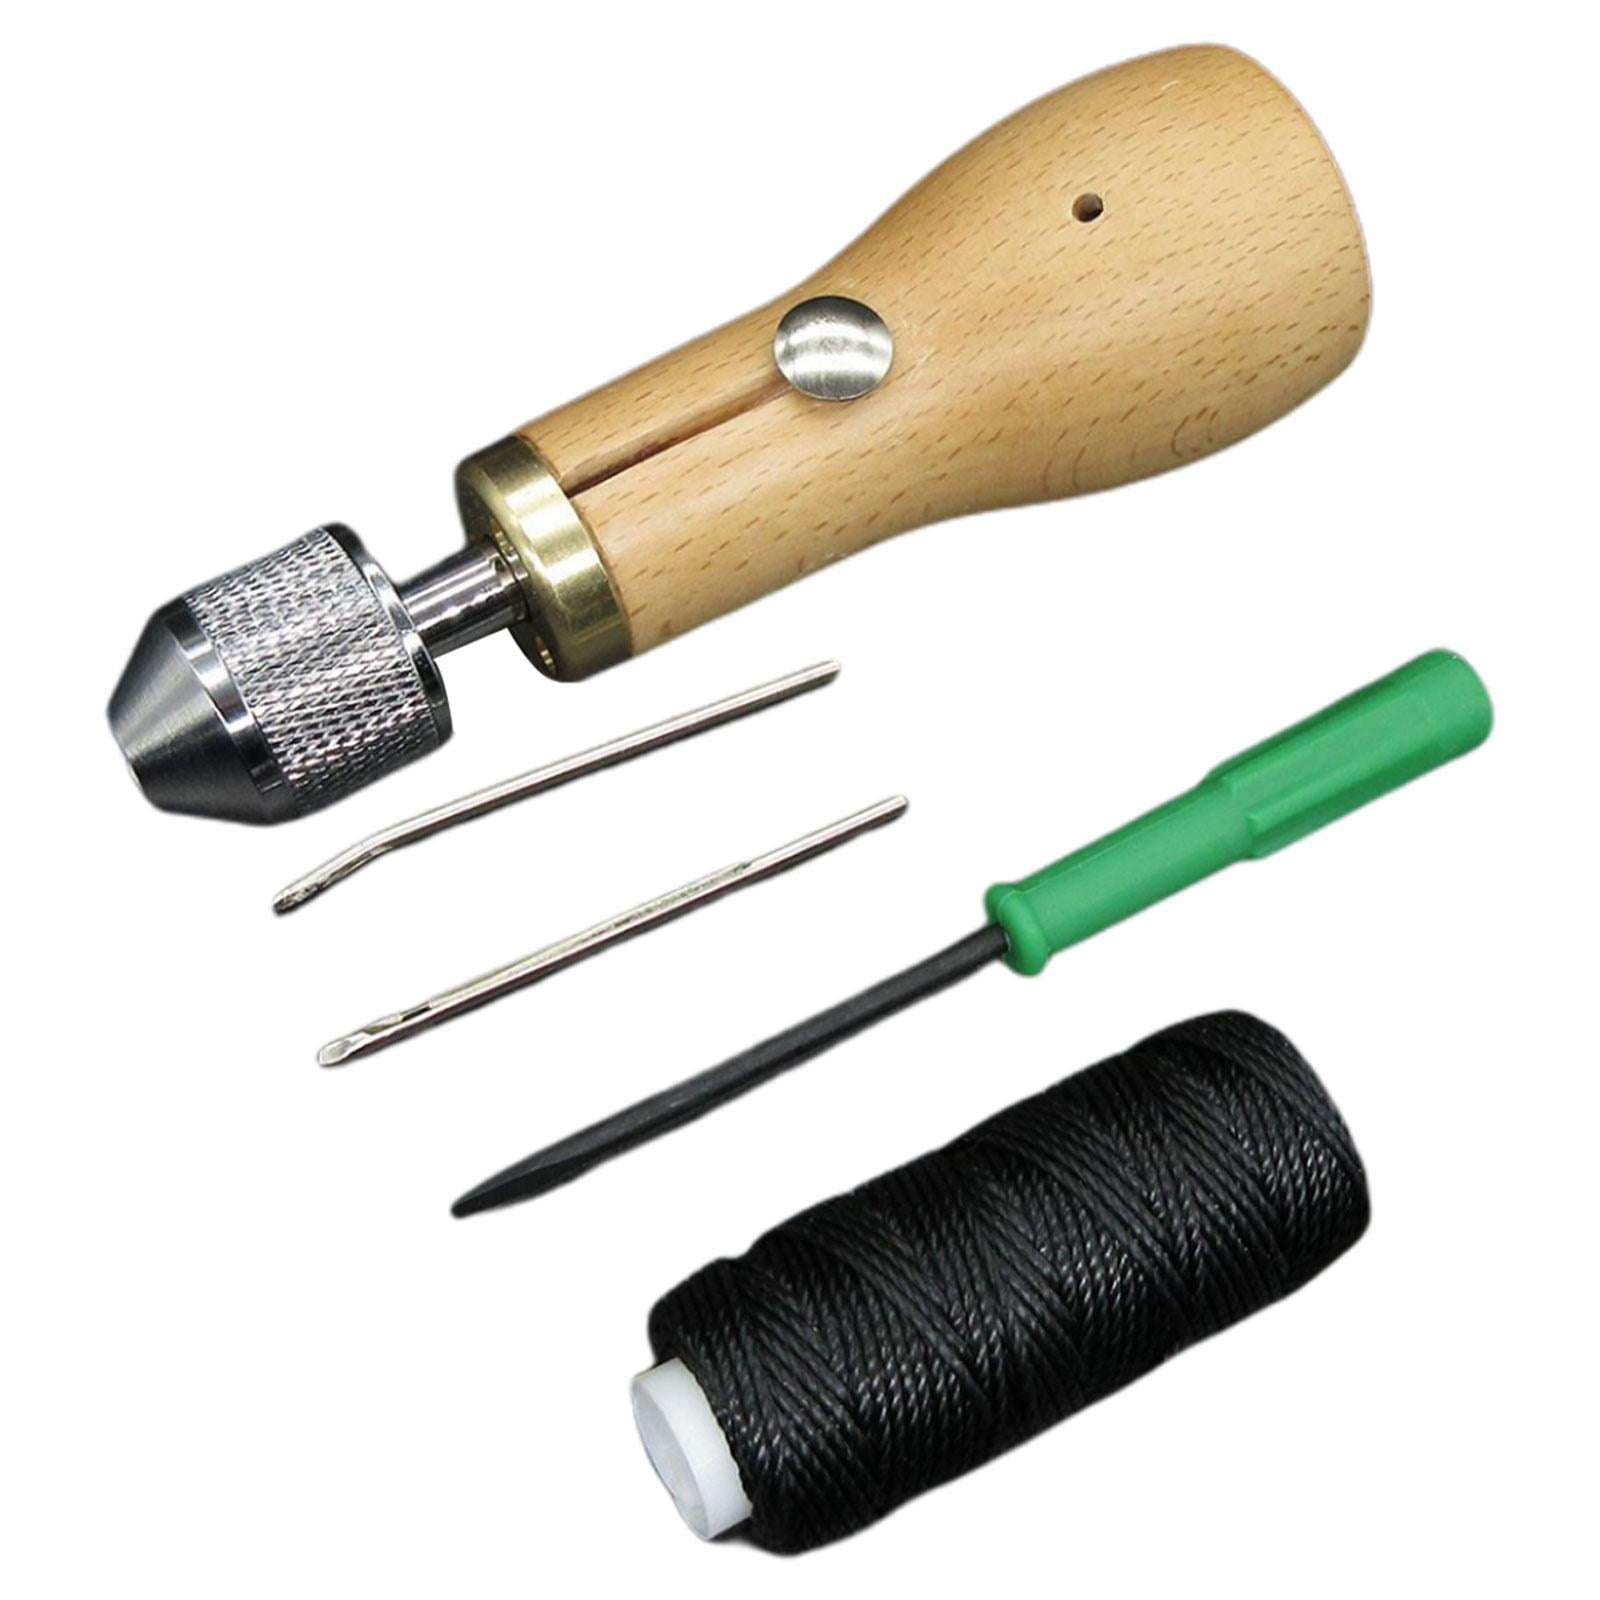 Wholesale sewing awl kit for Recreation and Hobby 